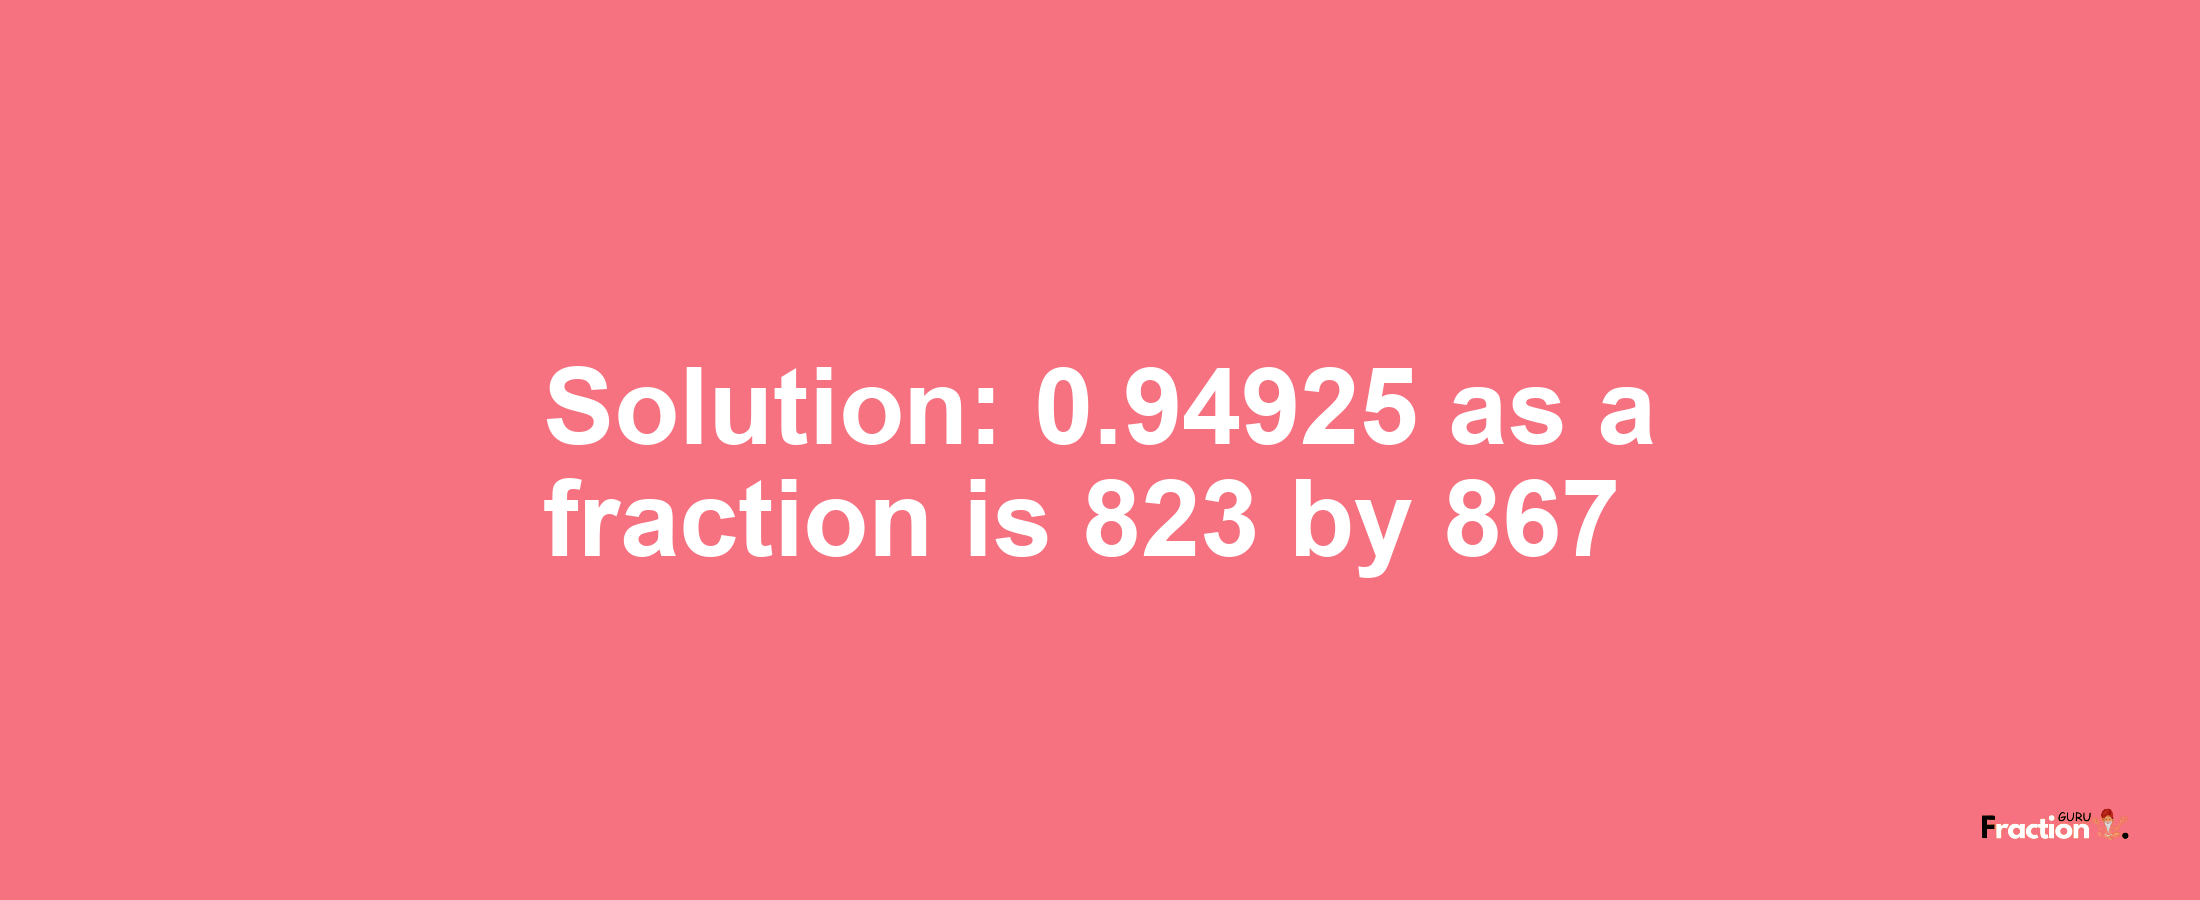 Solution:0.94925 as a fraction is 823/867